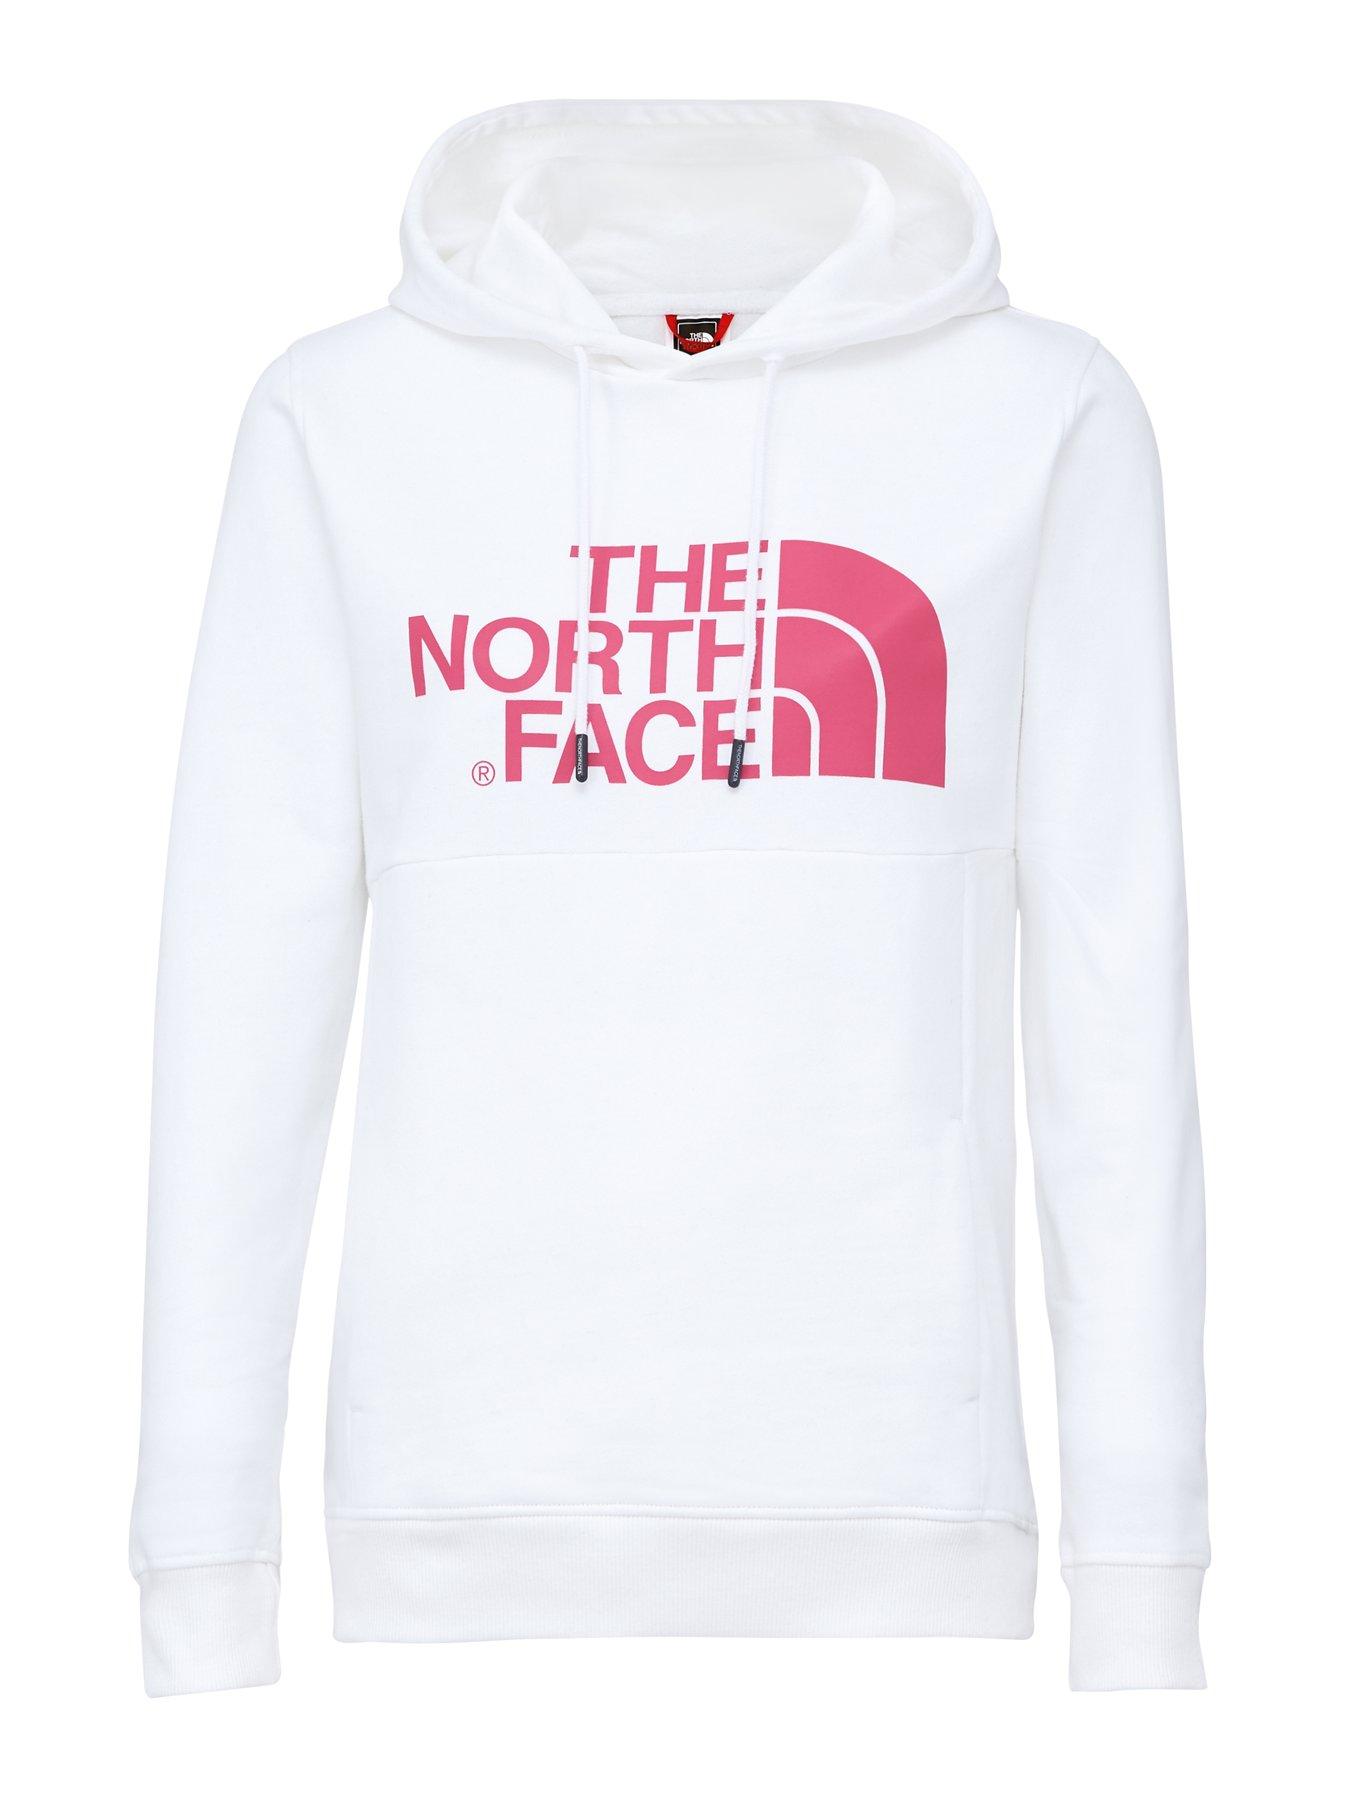 the north face hoodie uk